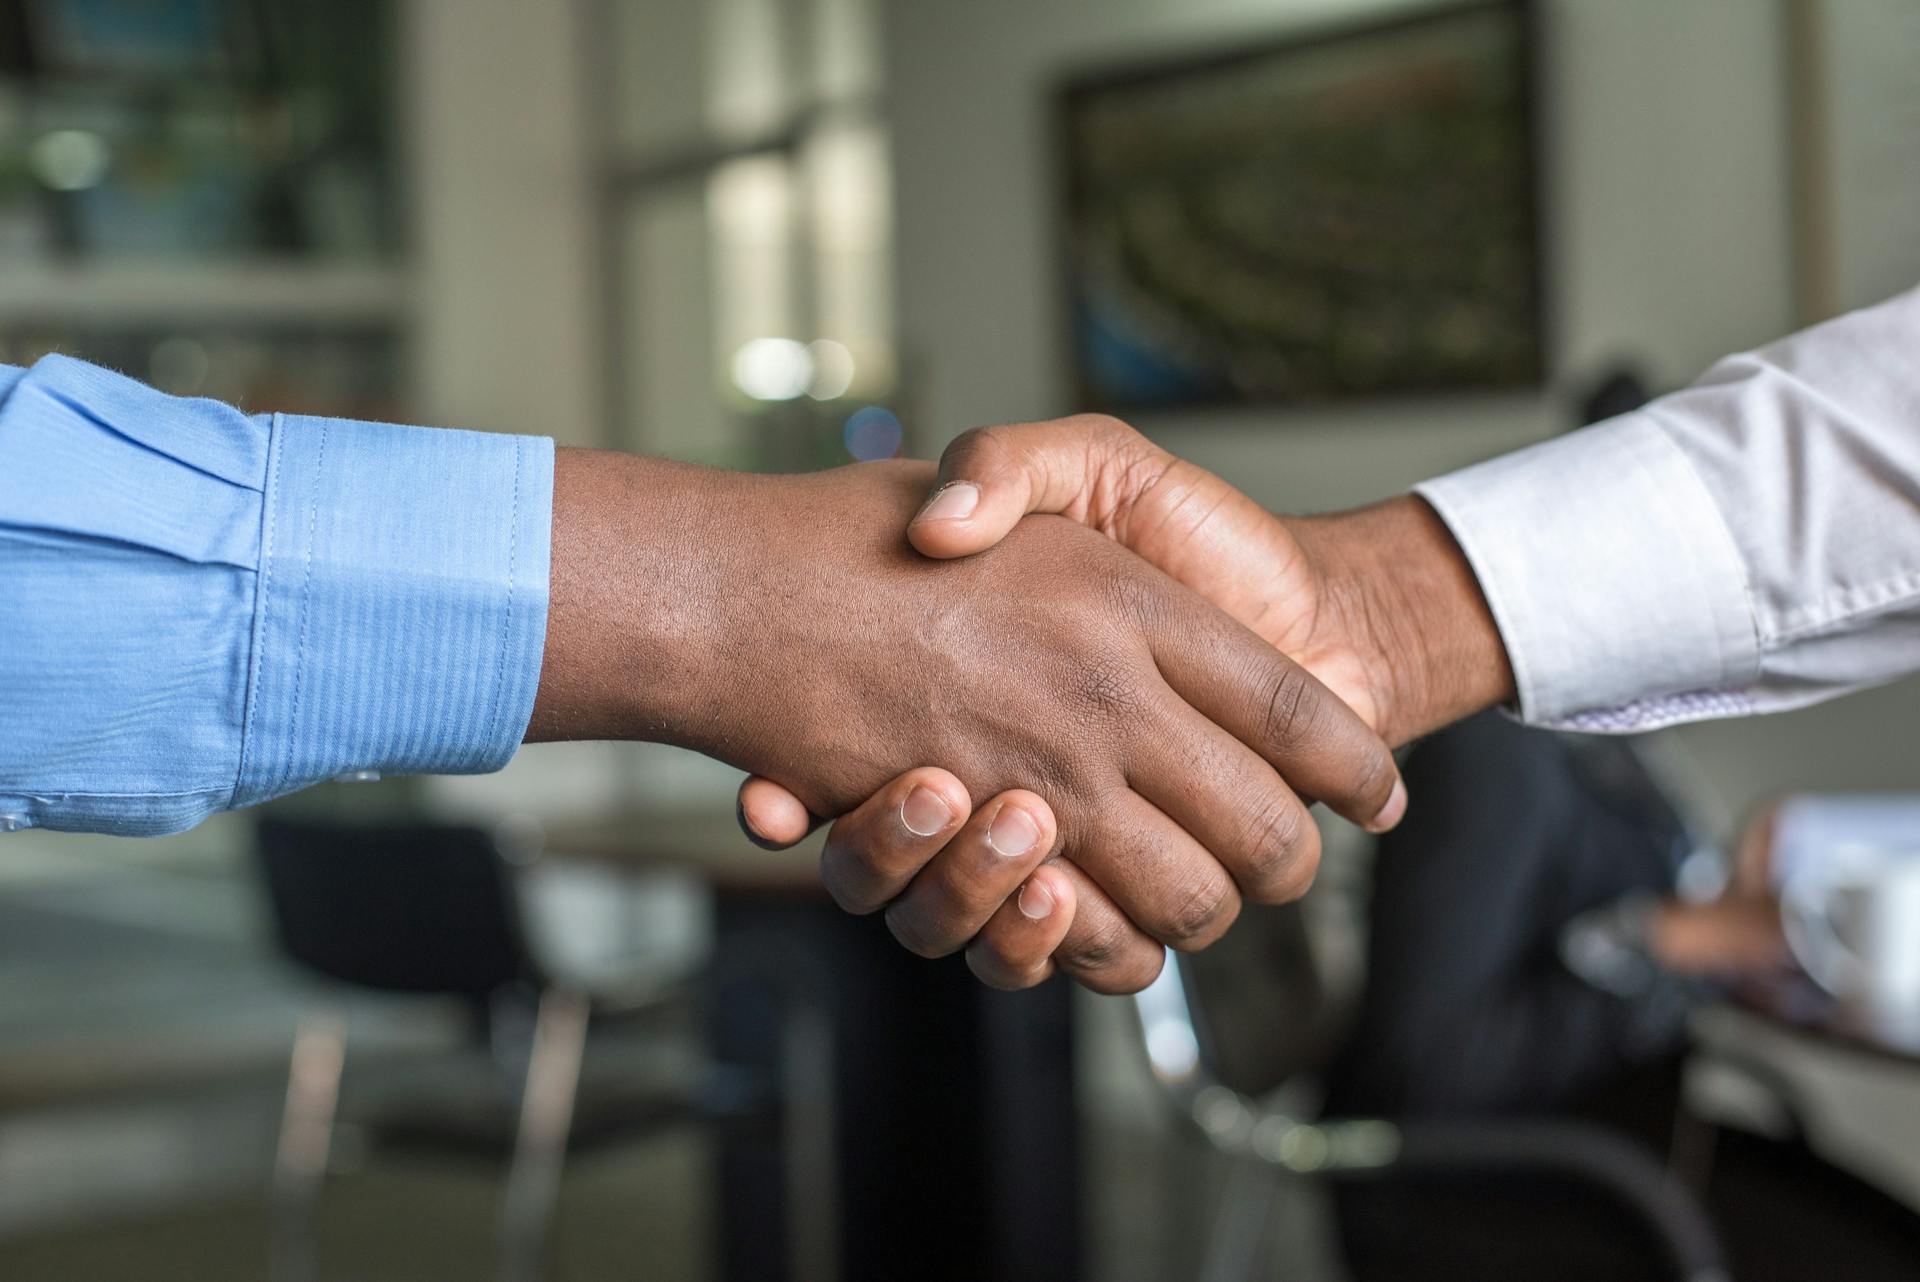 Two men shaking hands in a stock photo. Try to avoid cliches when blogging